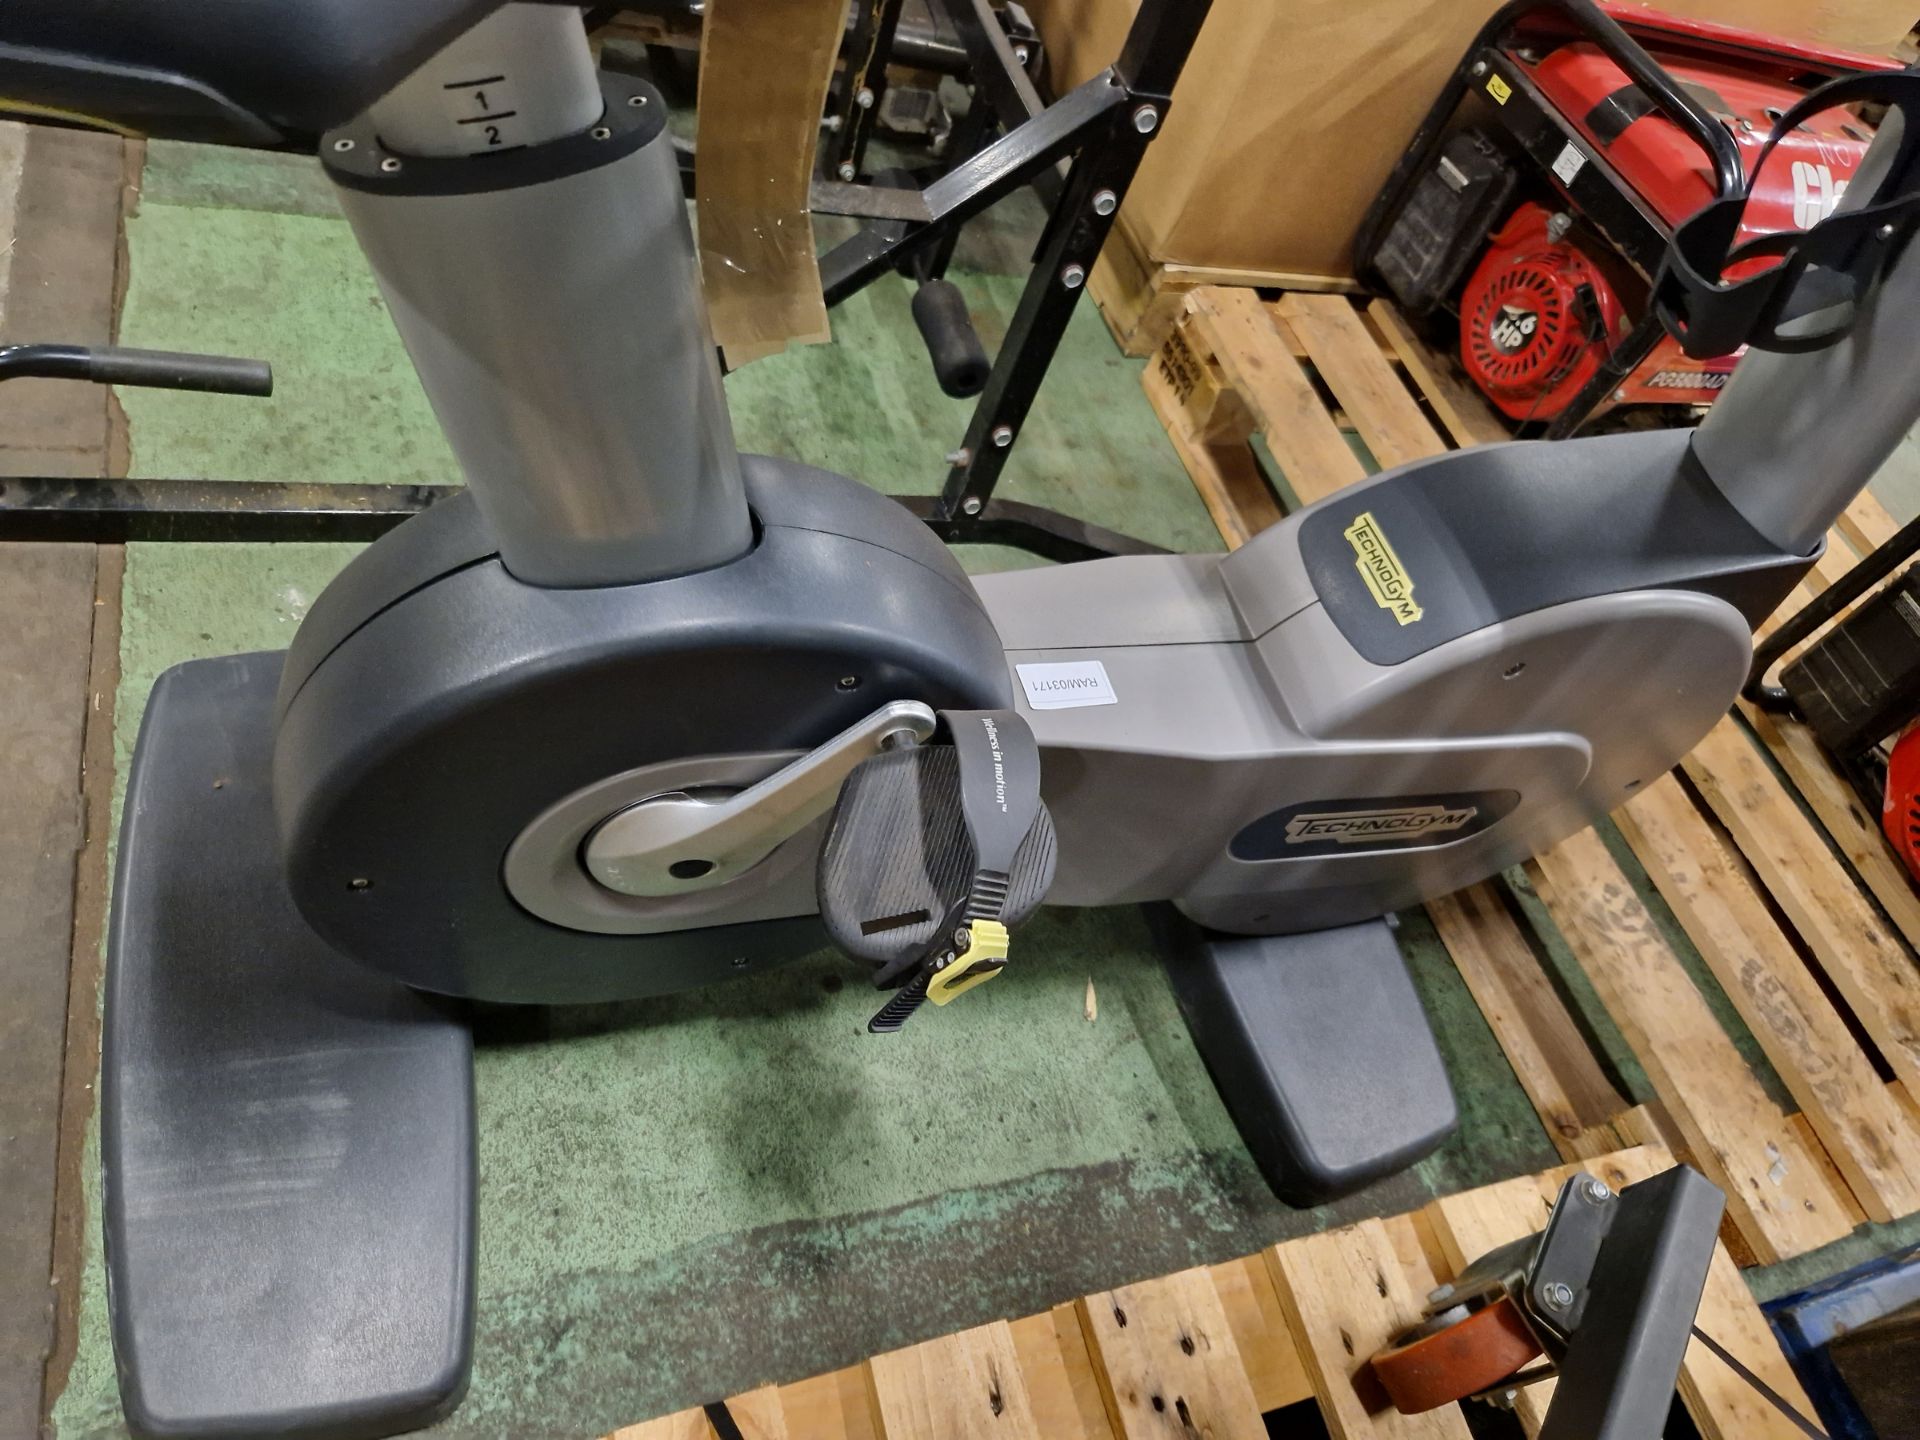 Technogym Excite 700 upright exercise bike L 1194 x W 610 x H 1346mm - Image 4 of 4